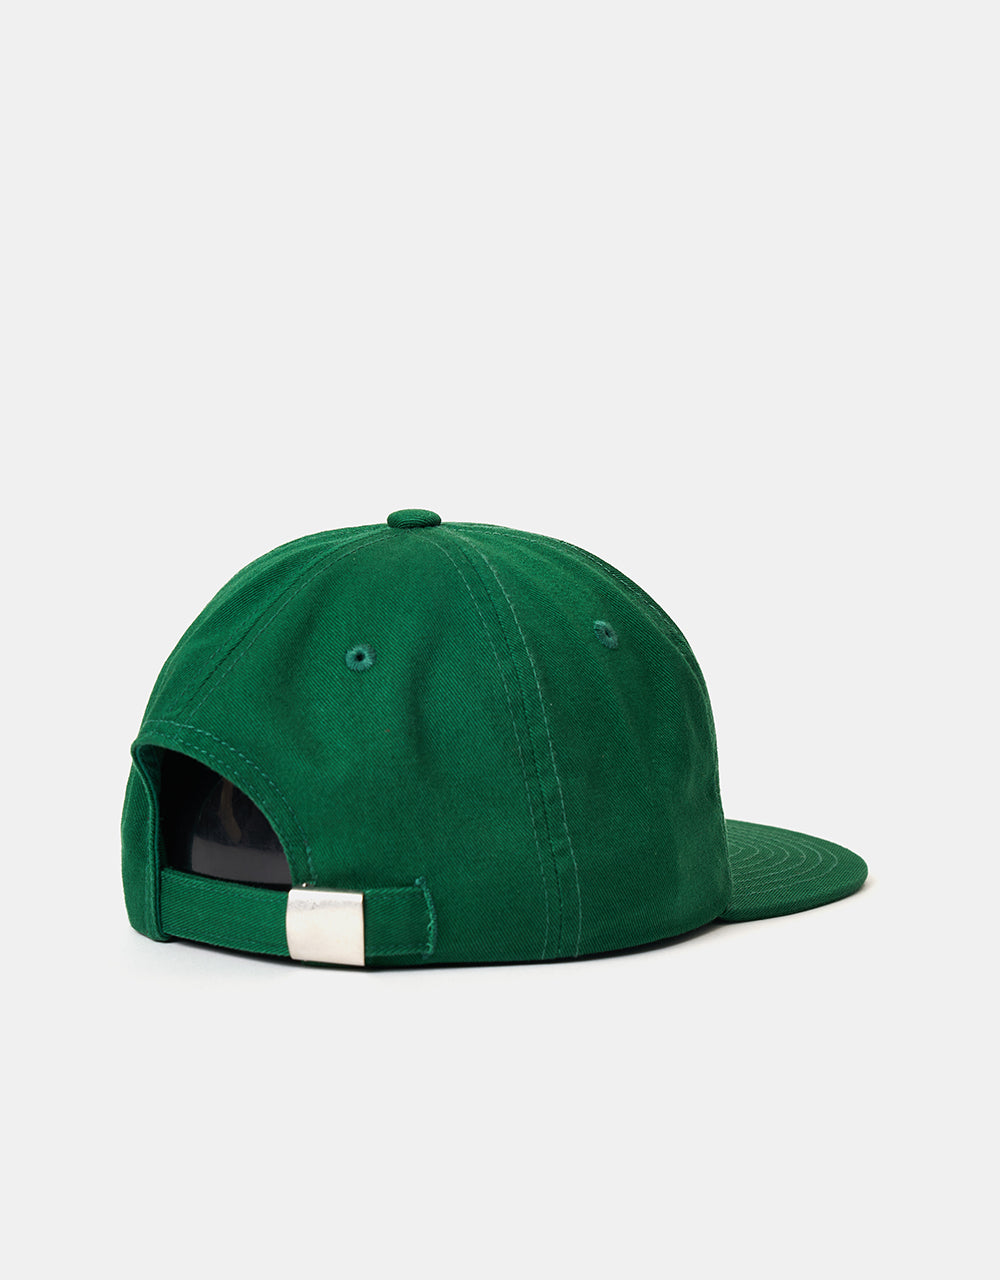 Route One Alien Unstructered 6 Panel Cap-Forest Green